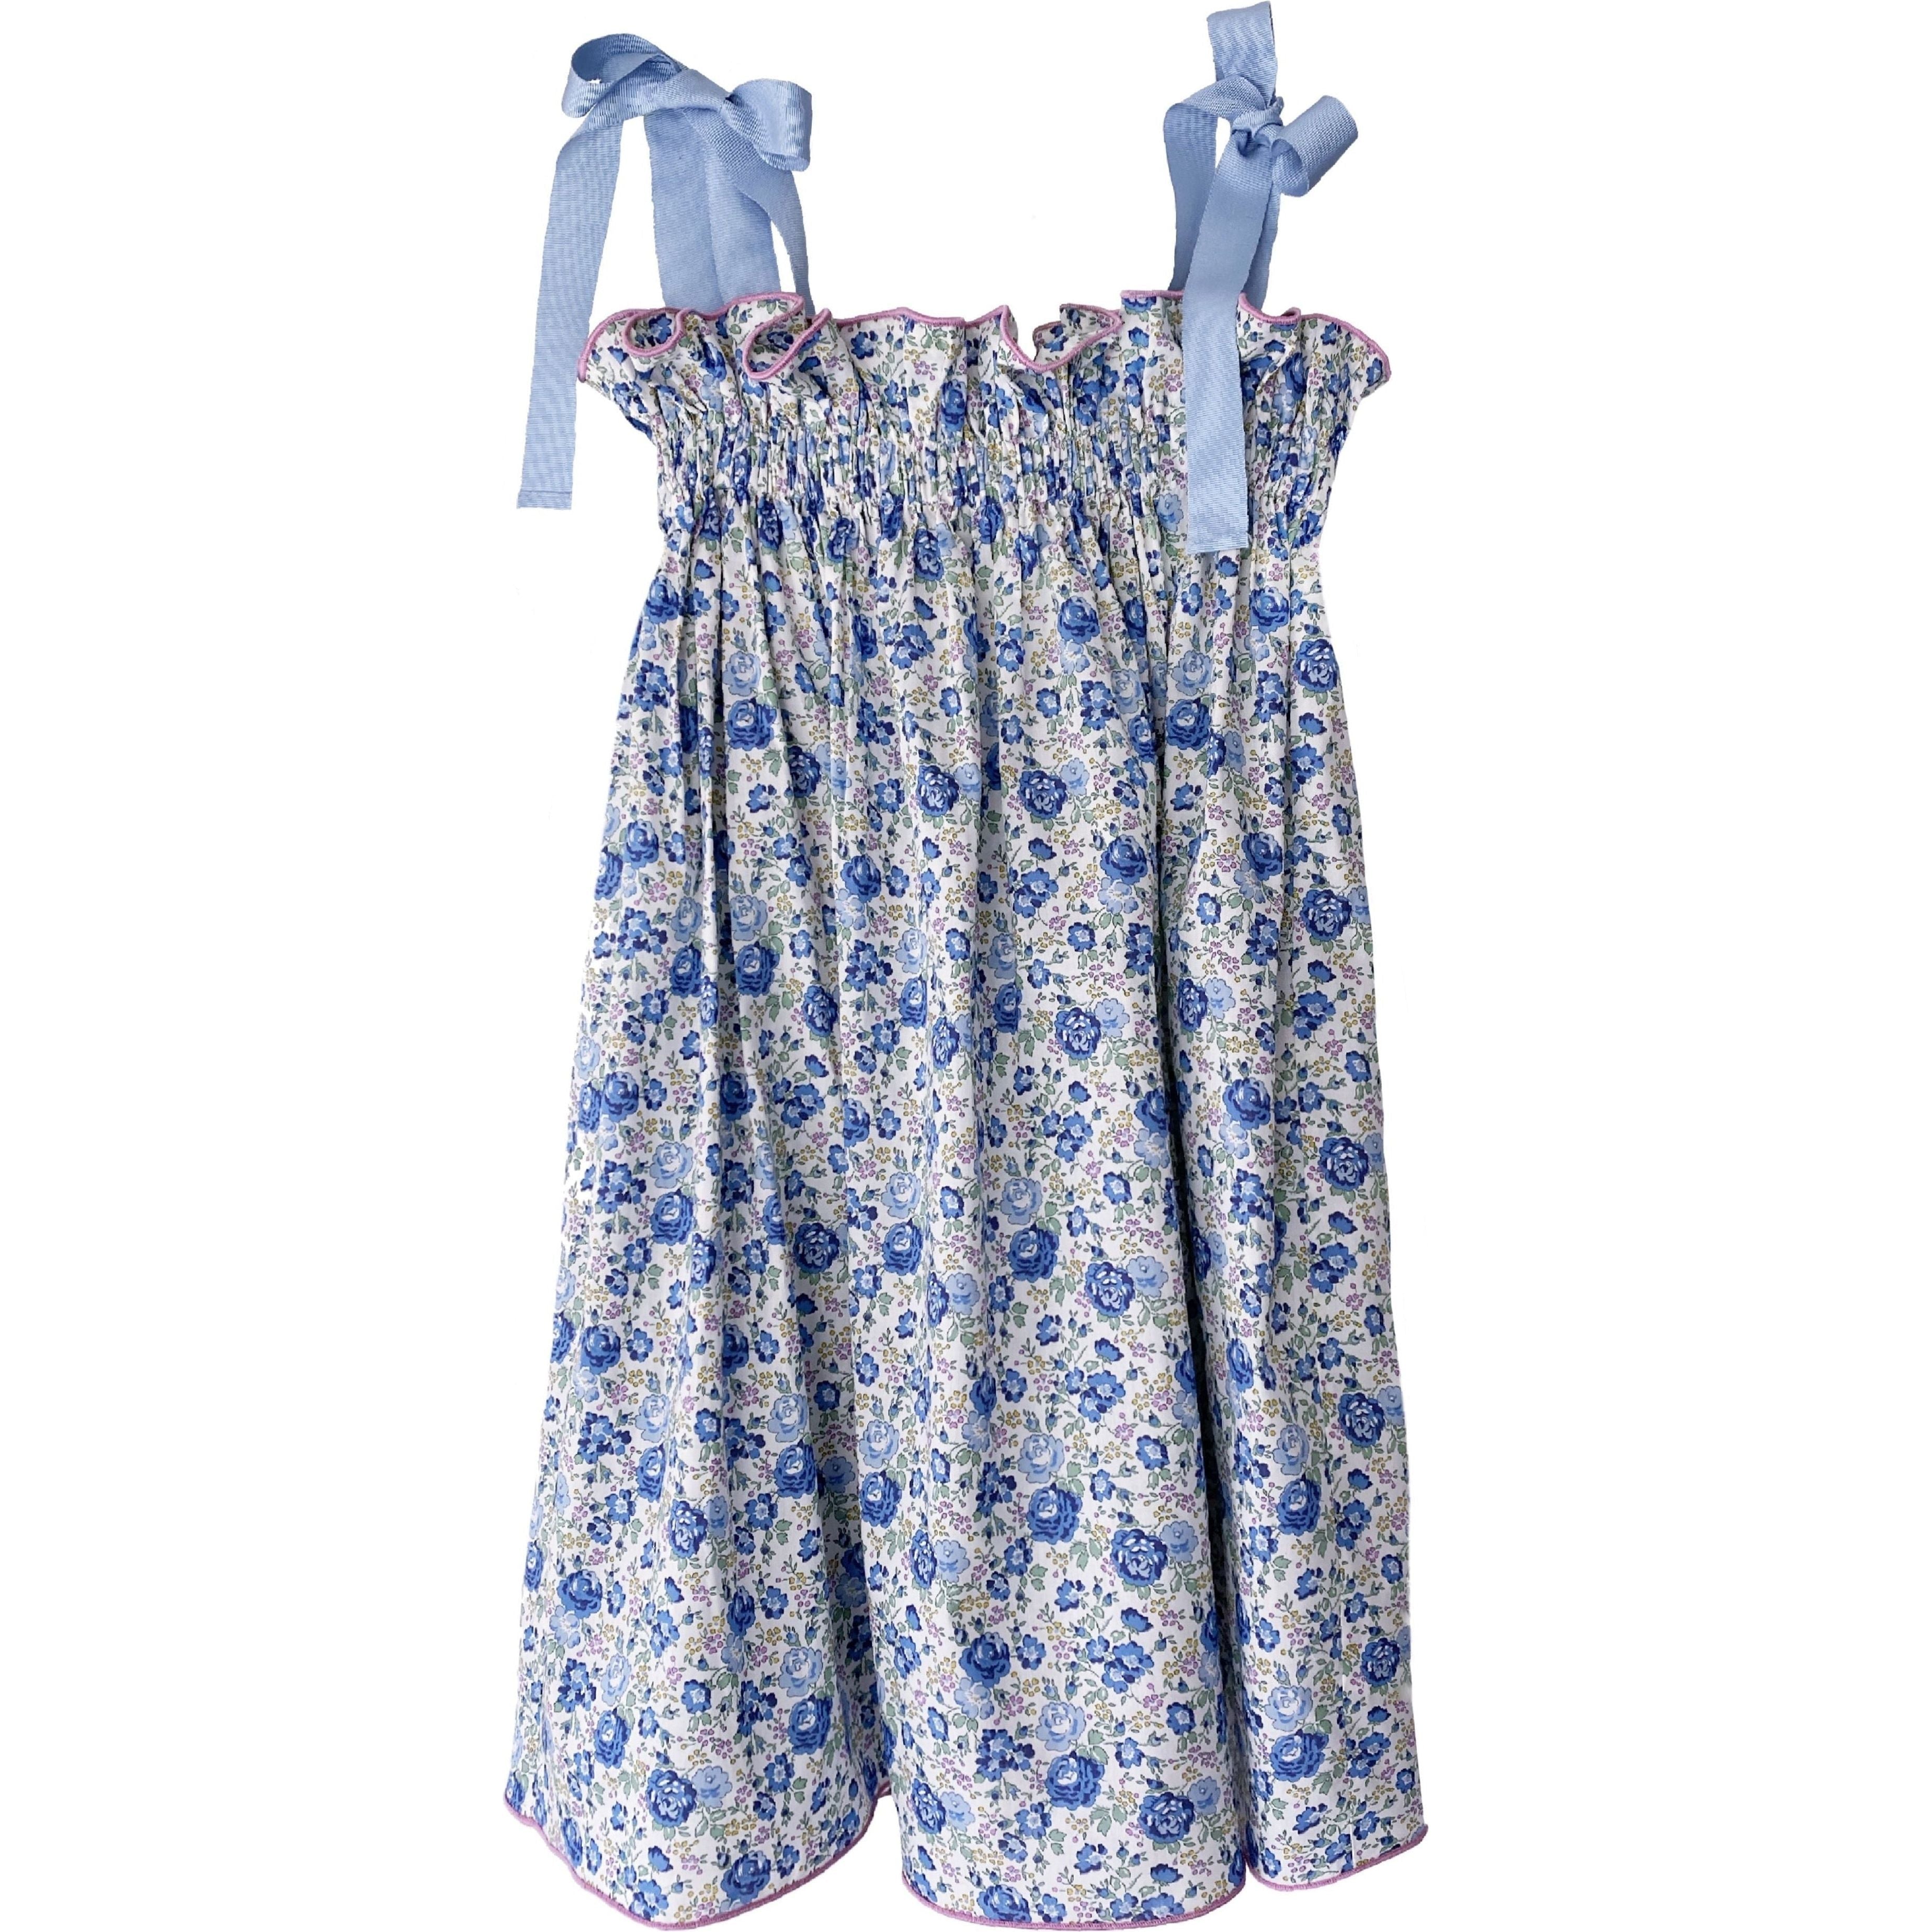 Girls' Jaime Dress in Blue Floral by Casey Marks